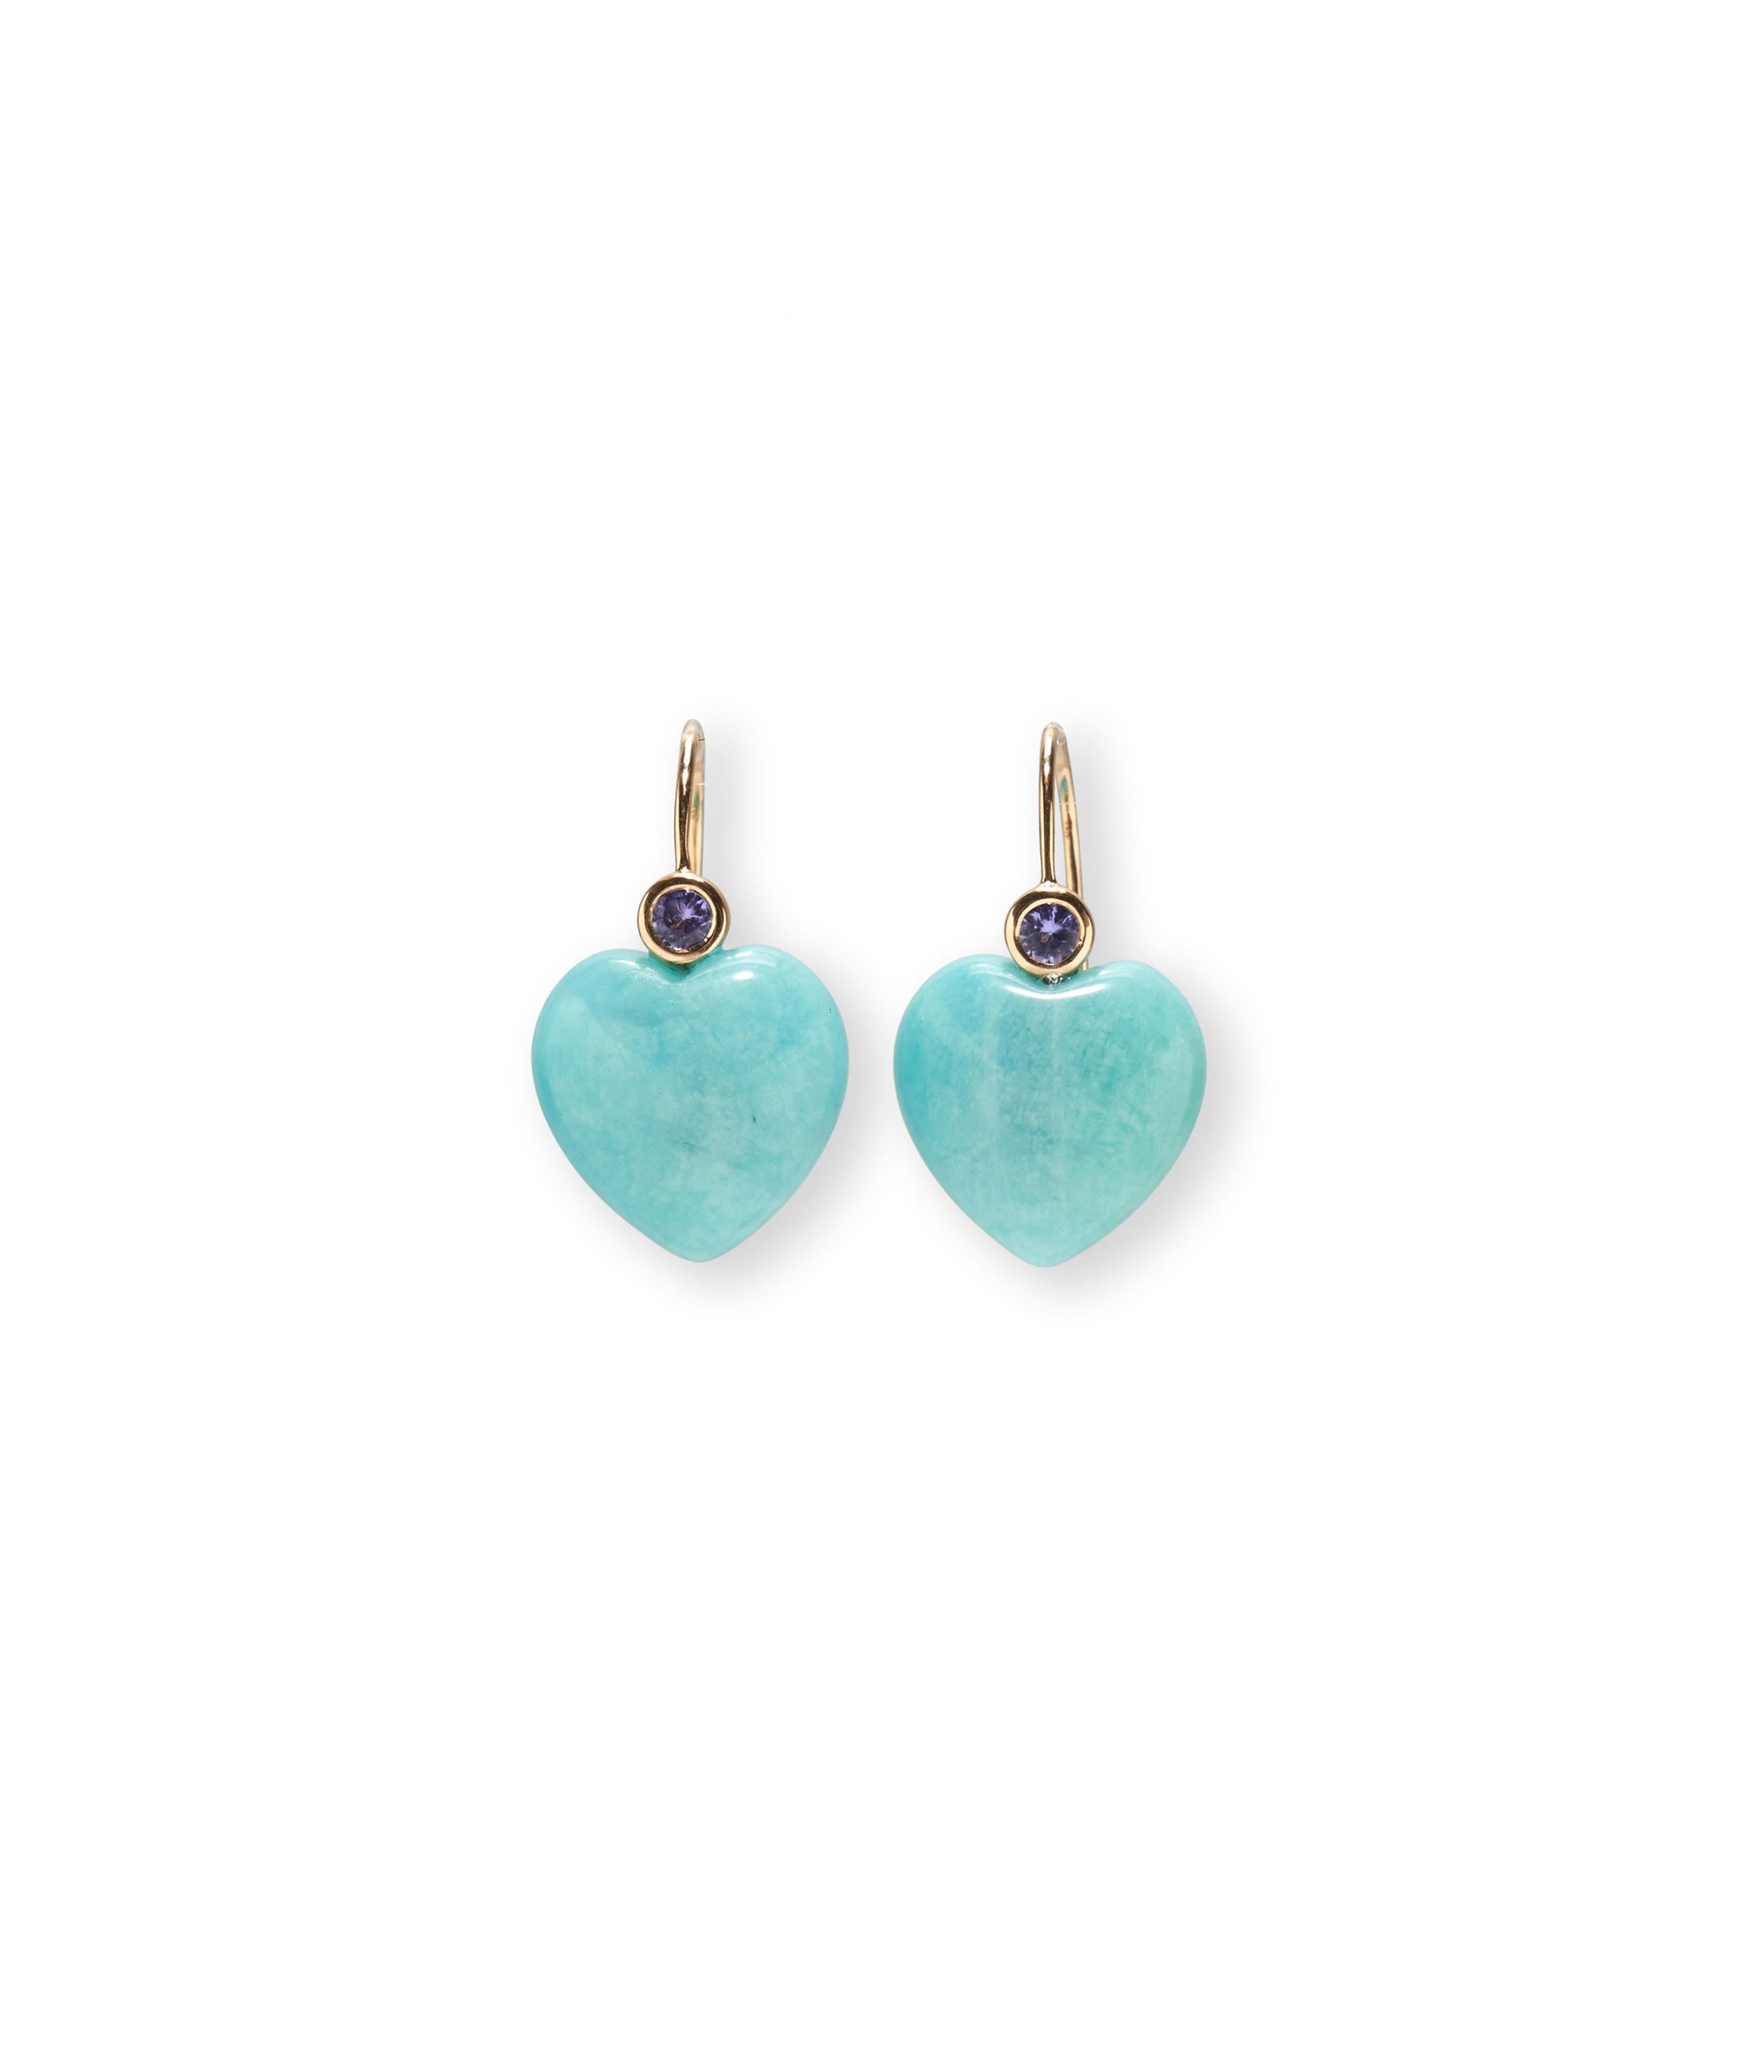 14k Gold Amor Earrings in Tanzanite & Amazonite. Carved amazonite hearts and tanzanite stone details.